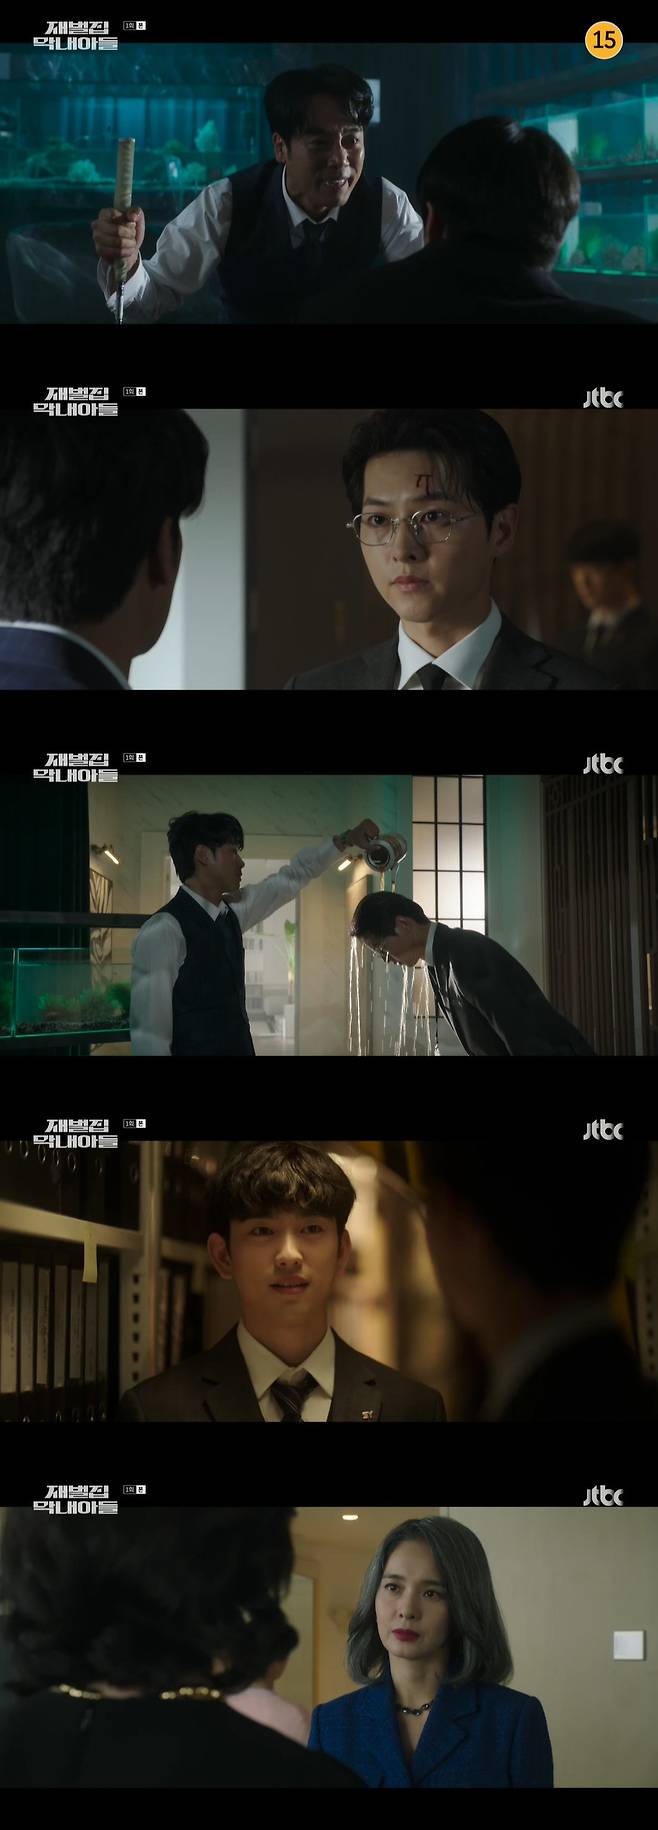 The Youngest Son of a Conglomerate Song Joong-ki was killed by J. Y. Park, and Conglomerate opened his eyes as the youngest.In JTBCs The Youngest Son of a Conglomerate, which first aired on the 18th, Yoon Hyeon-woo (Song Joong-ki), head of Sunyang Groups future asset management team, was depicted.Jinyoung (Yoonjae Moon) was sentenced to probation for embezzlement and Yoon Hyeon-woo prepared a cruiser event.JIN SUNGJOON (Kim Nam-hee) went to Jinyoung and said, I will not be able to do my fathers succession. I will give up my inheritance.Its over now, Jinyoung said, Its a scary law for a person who is a subject of pride. He caught JIN SUNGJOON.JIN SUNGJOON shook Jinyoungs hand and Jinyoung suddenly fell down complaining of difficulty breathing. Yoon Hyeon-woo witnessed this scene and JIN SUNGJOON ran out of his seat.Jinyoung underwent emergency surgery for acute myocardial infarction, and this news was only available to the Sunyang people.Mo Hyun-min (Park Ji-hyun) called Yoon Hyeon-woo aside and ordered him to visit JIN SUNGJOON, who ran away, saying that the announcement of the special statement was made by JIN SUNGJOON instead of Jinyoung.JIN SUNGJOON, who was hiding in the hotel, wielded a golf club in front of the staff, and Yoon Hyeon-woo found such a JIN SUNGJOON.Yoon Hyeon-woo tried to persuade JIN SUNGJOON to take him to the Event. Yoon Hyeon-woo told JIN SUNGJOON, What happened before the president fell will never be known outside.I will never open my mouth. Thanks to Yoon Hyeon-woo, JIN SUNGJOON solidified his position at the event.Shin Hyun-bin seized Sunyang products, and Yoon Hyeon-woo visited Seo Min-young.Seo Min-young said, JIN SUNGJOON vice chairman did accounting for illegal succession, and Yoon Hyeon-woo denied it effortlessly.However, Yoon Hyeon-woo knew about the raid and took action: the computer was a new product and all the documents were promotional materials.Jinyoungs surgery was successful, but he needed absolute stability. Jinyoungs fourth son, Kim Young-jae, and his wife Lee Hae-in (Jung Hye-young), who had been isolated from the family, came to visit.Lee Hae-in said, I brought 3% of Sunyangs shares. My stake in the Sunyang management battle will be a casting fight. When asked, Lee Hae-in said, What are the conditions?I need to know the truth of the accident that day. You know. Bring me the answer. Then I transfer all of my shares. Shin Kyung-min (J. Y. Park) told Yoon Hyeon-woo that he found a document that was not on the list while he was disposing of the material. This document is related to Sunyangs paper company.Yoon Hyeon-woo reported to the general manager, Someone is taking a large amount of pure assets overseas through this ghost paper company, and the general manager immediately shredded the document.However, Yoon Hyeon-woo informed JIN SUNGJOON that Yoon Hyeon-woo suggested move ahead of the prosecution and attribute assets that went abroad to the assets of Sunyang Products.JIN SUNGJOON, who heard them, informed the general manager who came in with good timing, Yoon team leader brought something interesting.Nolan Yoon Hyeon-woo lied to JIN SUNGJOON, Where is the original document?JIN SUNGJOON instructed Yoon Hyeon-woo, As of today, I am appointing you as the head of the finance team. Find the assets of Sunyang that have been leaked abroad.JIN SUNGJOON said, So now I have to have something in my name. I will have the light of a new cruiser. I want my father to take the dark shadow of the sun.Yoon Hyeon-woo, who went overseas under the direction of JIN SUNGJOON, received $600 million in his own account.Meanwhile, Seo Min-young (Shin Hyun-bin) obtained a conversation between JIN SUNGJOON and Yoon Hyeon-woo recorded by Jin Jinyoung (Kim Shin-rok).On the way back after getting the money, Yoon Hyeon-woo felt a strange sensation. Someone chased Yoon Hyeon-woo and Yoon Hyeon-woo felt it.Gunmen blocked Yoon Hyeon-woos car, and Yoon Hyeon-woo made a mortal escape, apparently succeeding in escaping, but Yoon Hyeon-woo collapsed under the influence of drugs.Shin Kyung-min appeared in front of Yoon Hyeon-woo who was kidnapped.Shin Kyung-min said, Didnt the team leader tell you not to reject the orders from the top, dont ask questions, and dont make any judgments? I just followed them.When asked, Who did this to you?, Shin Kyung-min answered, This is who I need. Yoon Hyeon-woo was shot and fell into the sea.When I opened my eyes, Yoon Hyeon-woo was in the car of Kim Young-jae and Lee Hae-in.Yoon Hyeon-woo said, Why did my body become like this? Lee Hae-in called Yoon Hyeon-woo Do Jun. Yoon Hyeon-woo became Jin Yoon-ki and Lee Hae-ins second son, Jindo Jun.